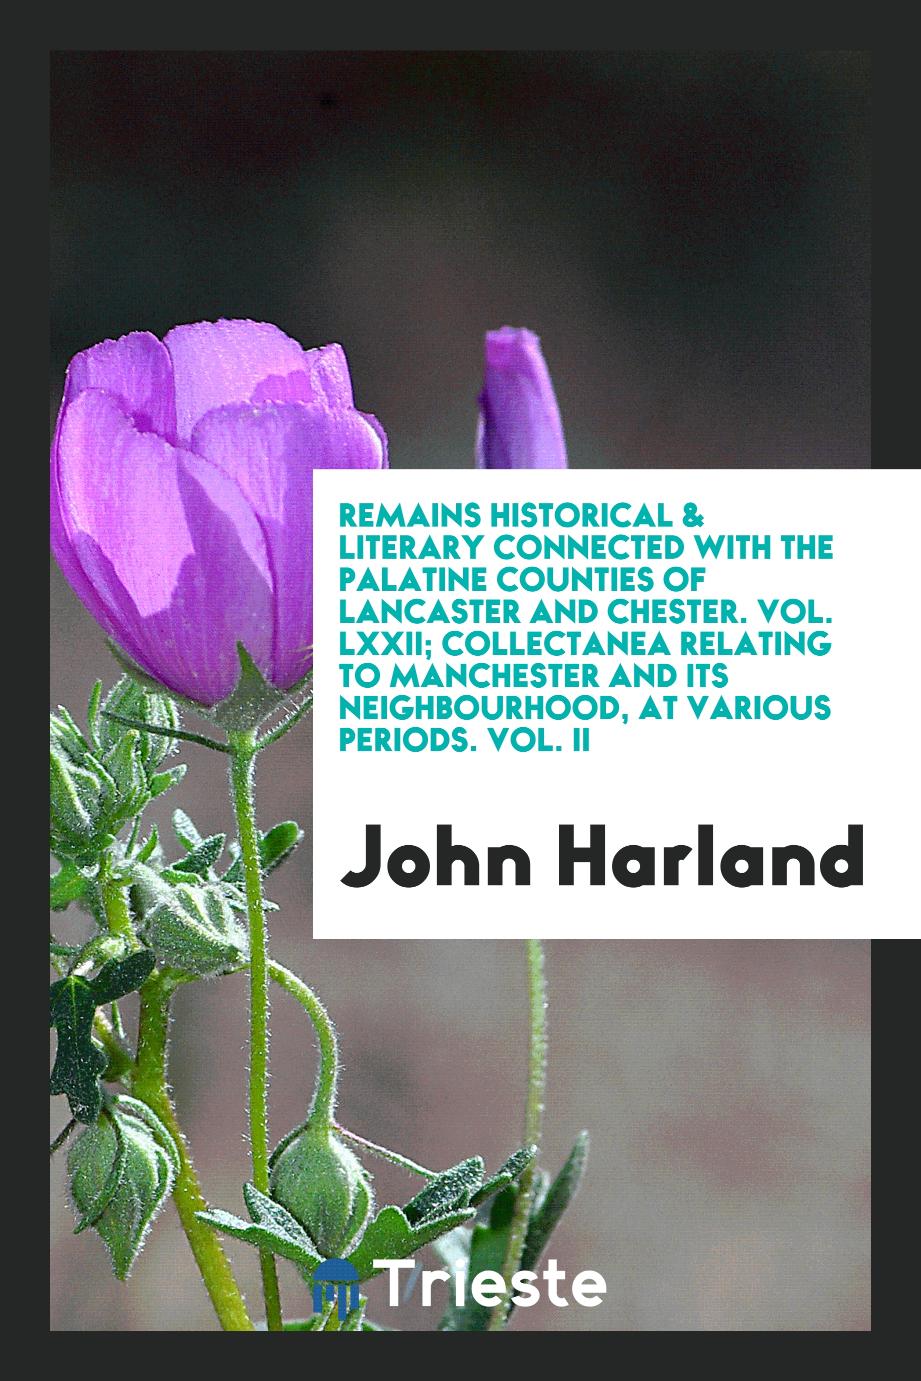 Remains Historical & Literary Connected with the Palatine Counties of Lancaster and Chester. Vol. LXXII; Collectanea Relating to Manchester and Its Neighbourhood, at Various Periods. Vol. II